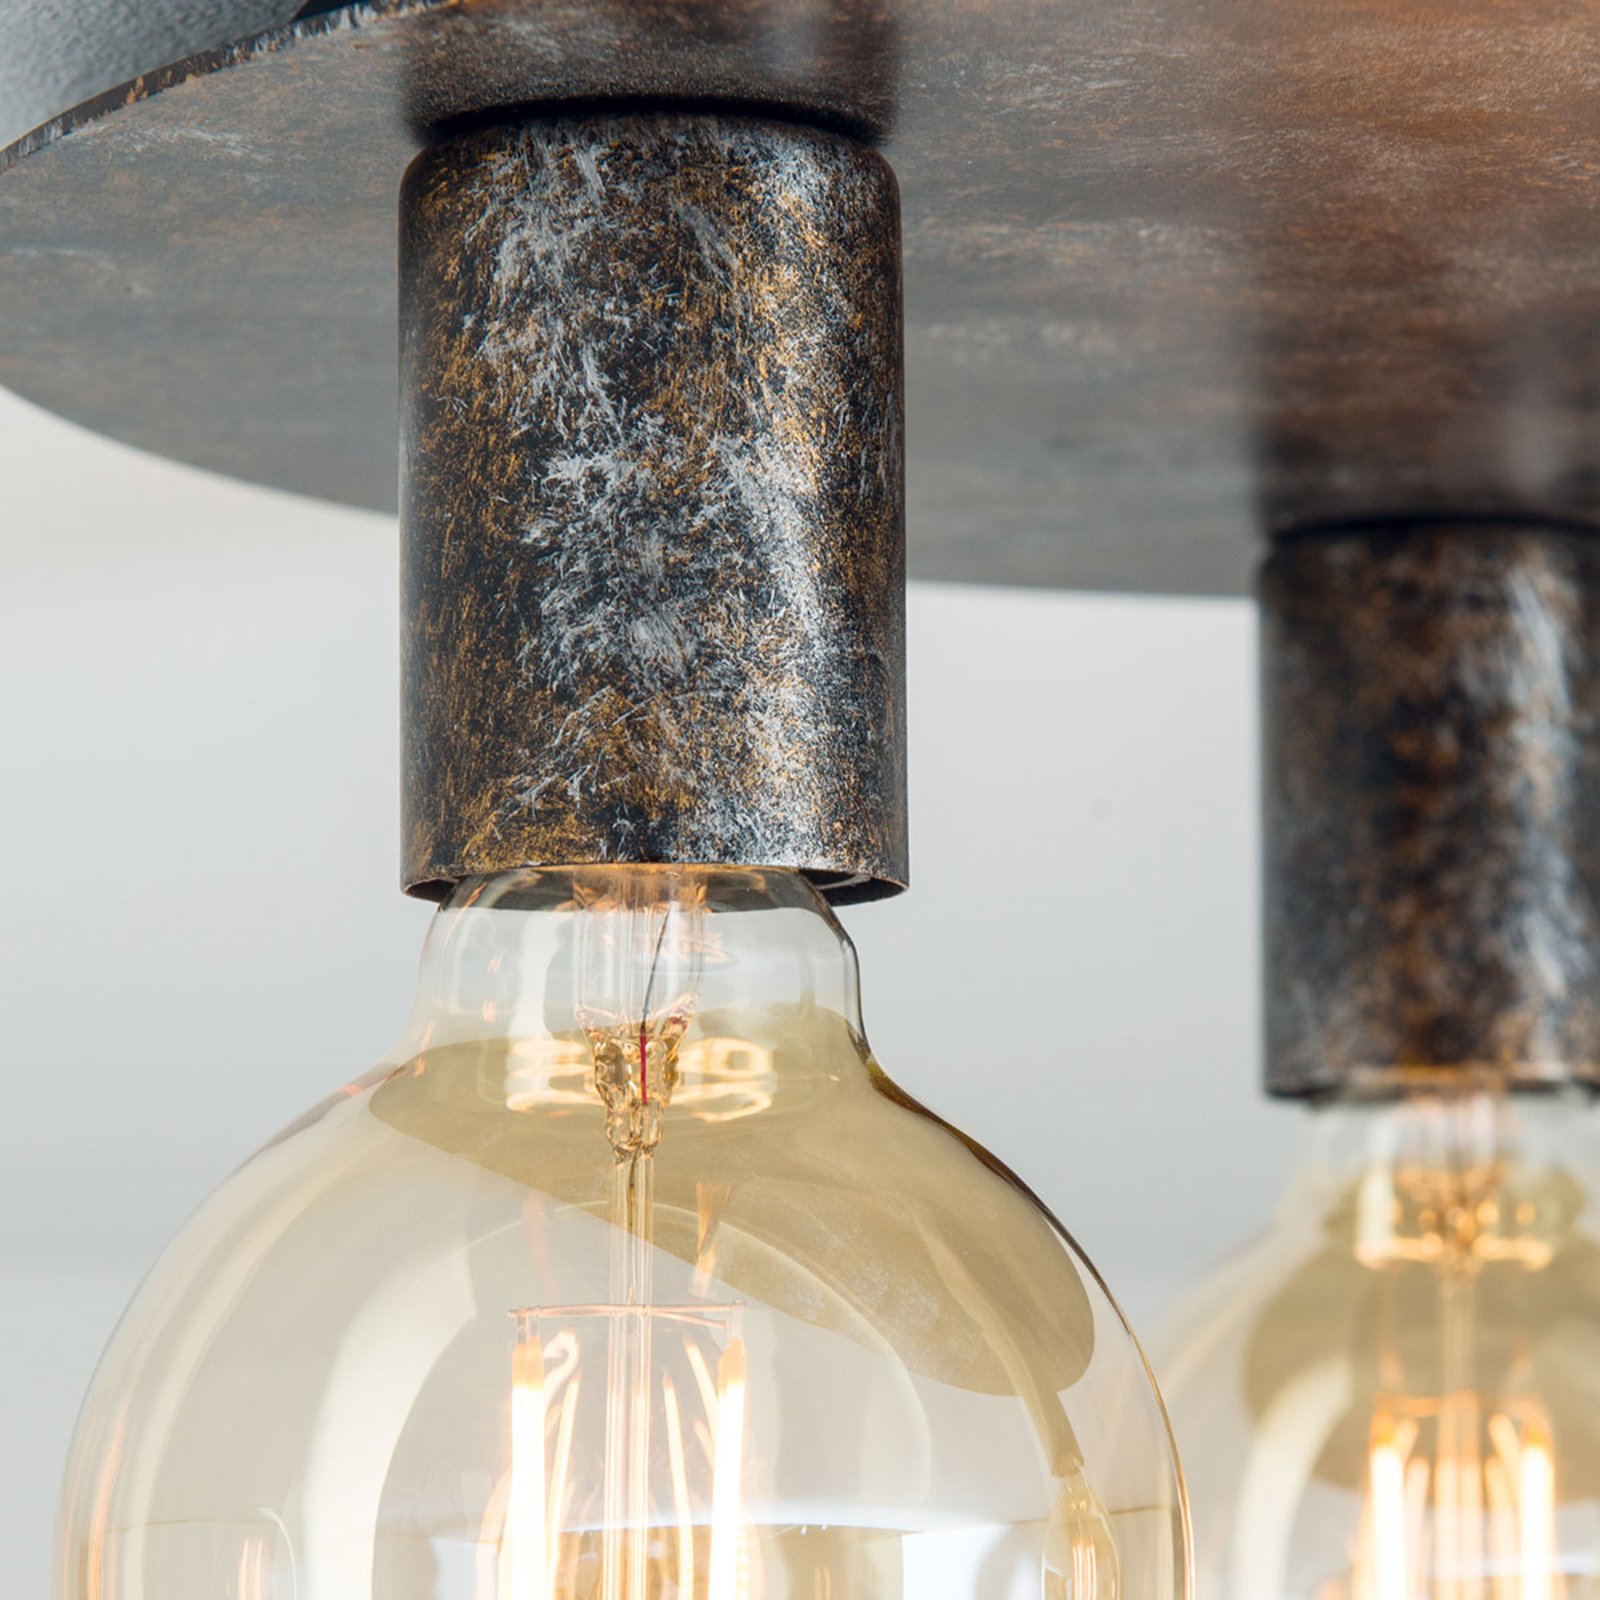 Three-bulb ceiling light Rati in a vintage look